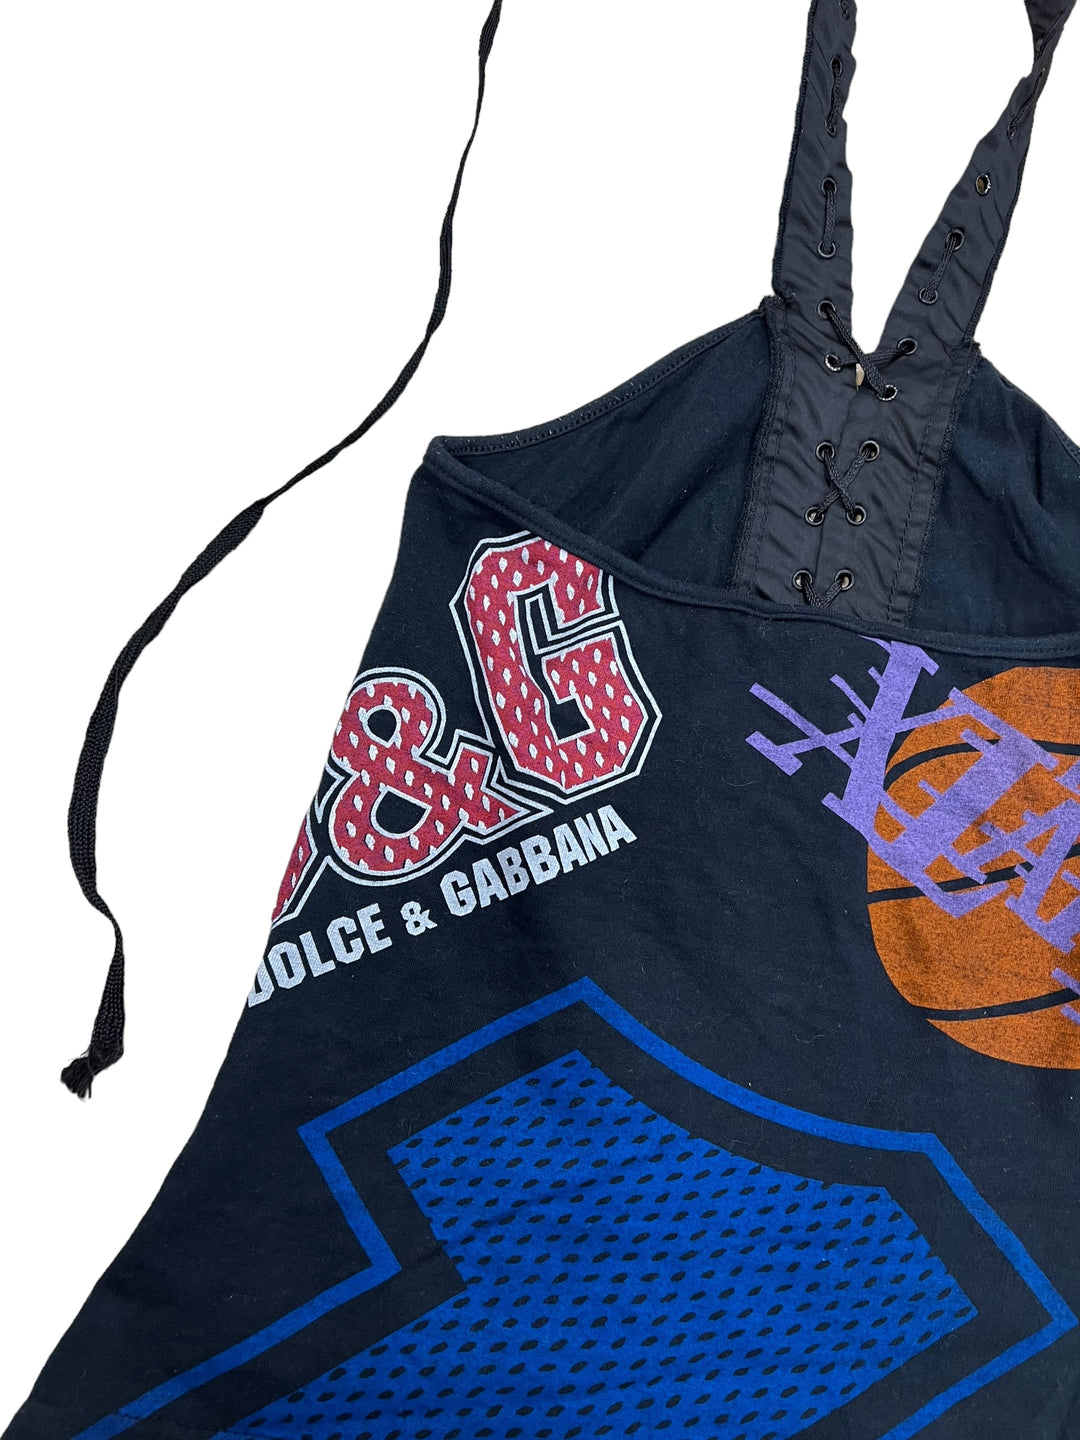 Dolce & Gabbana Basketball Lace up Text corset top Small